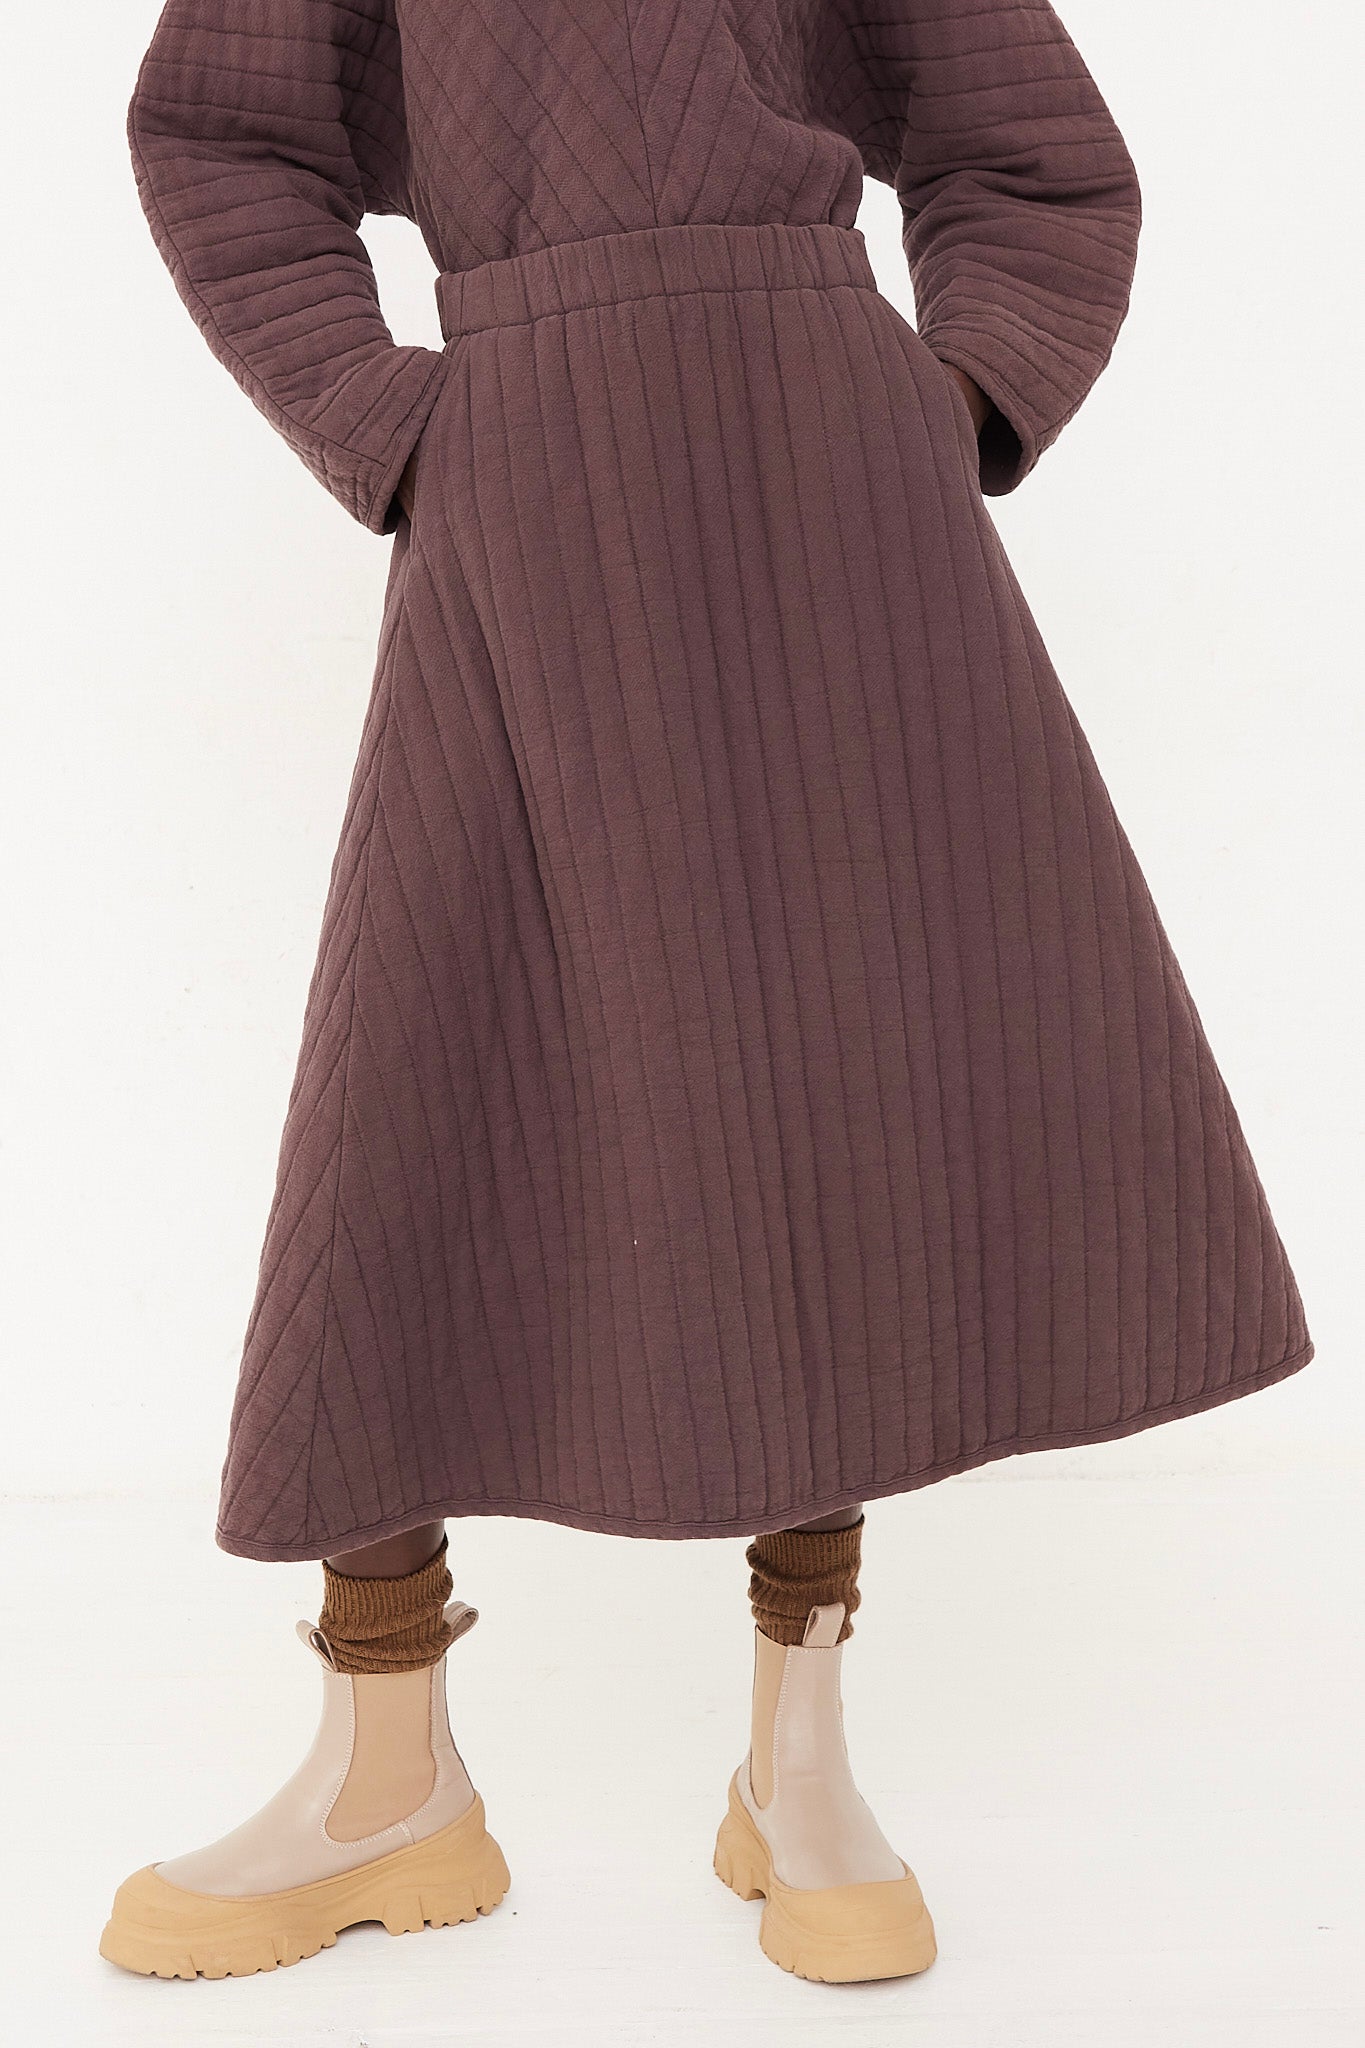 The model is wearing a Black Crane Quilted Skirt in Plum with an elasticated waist.